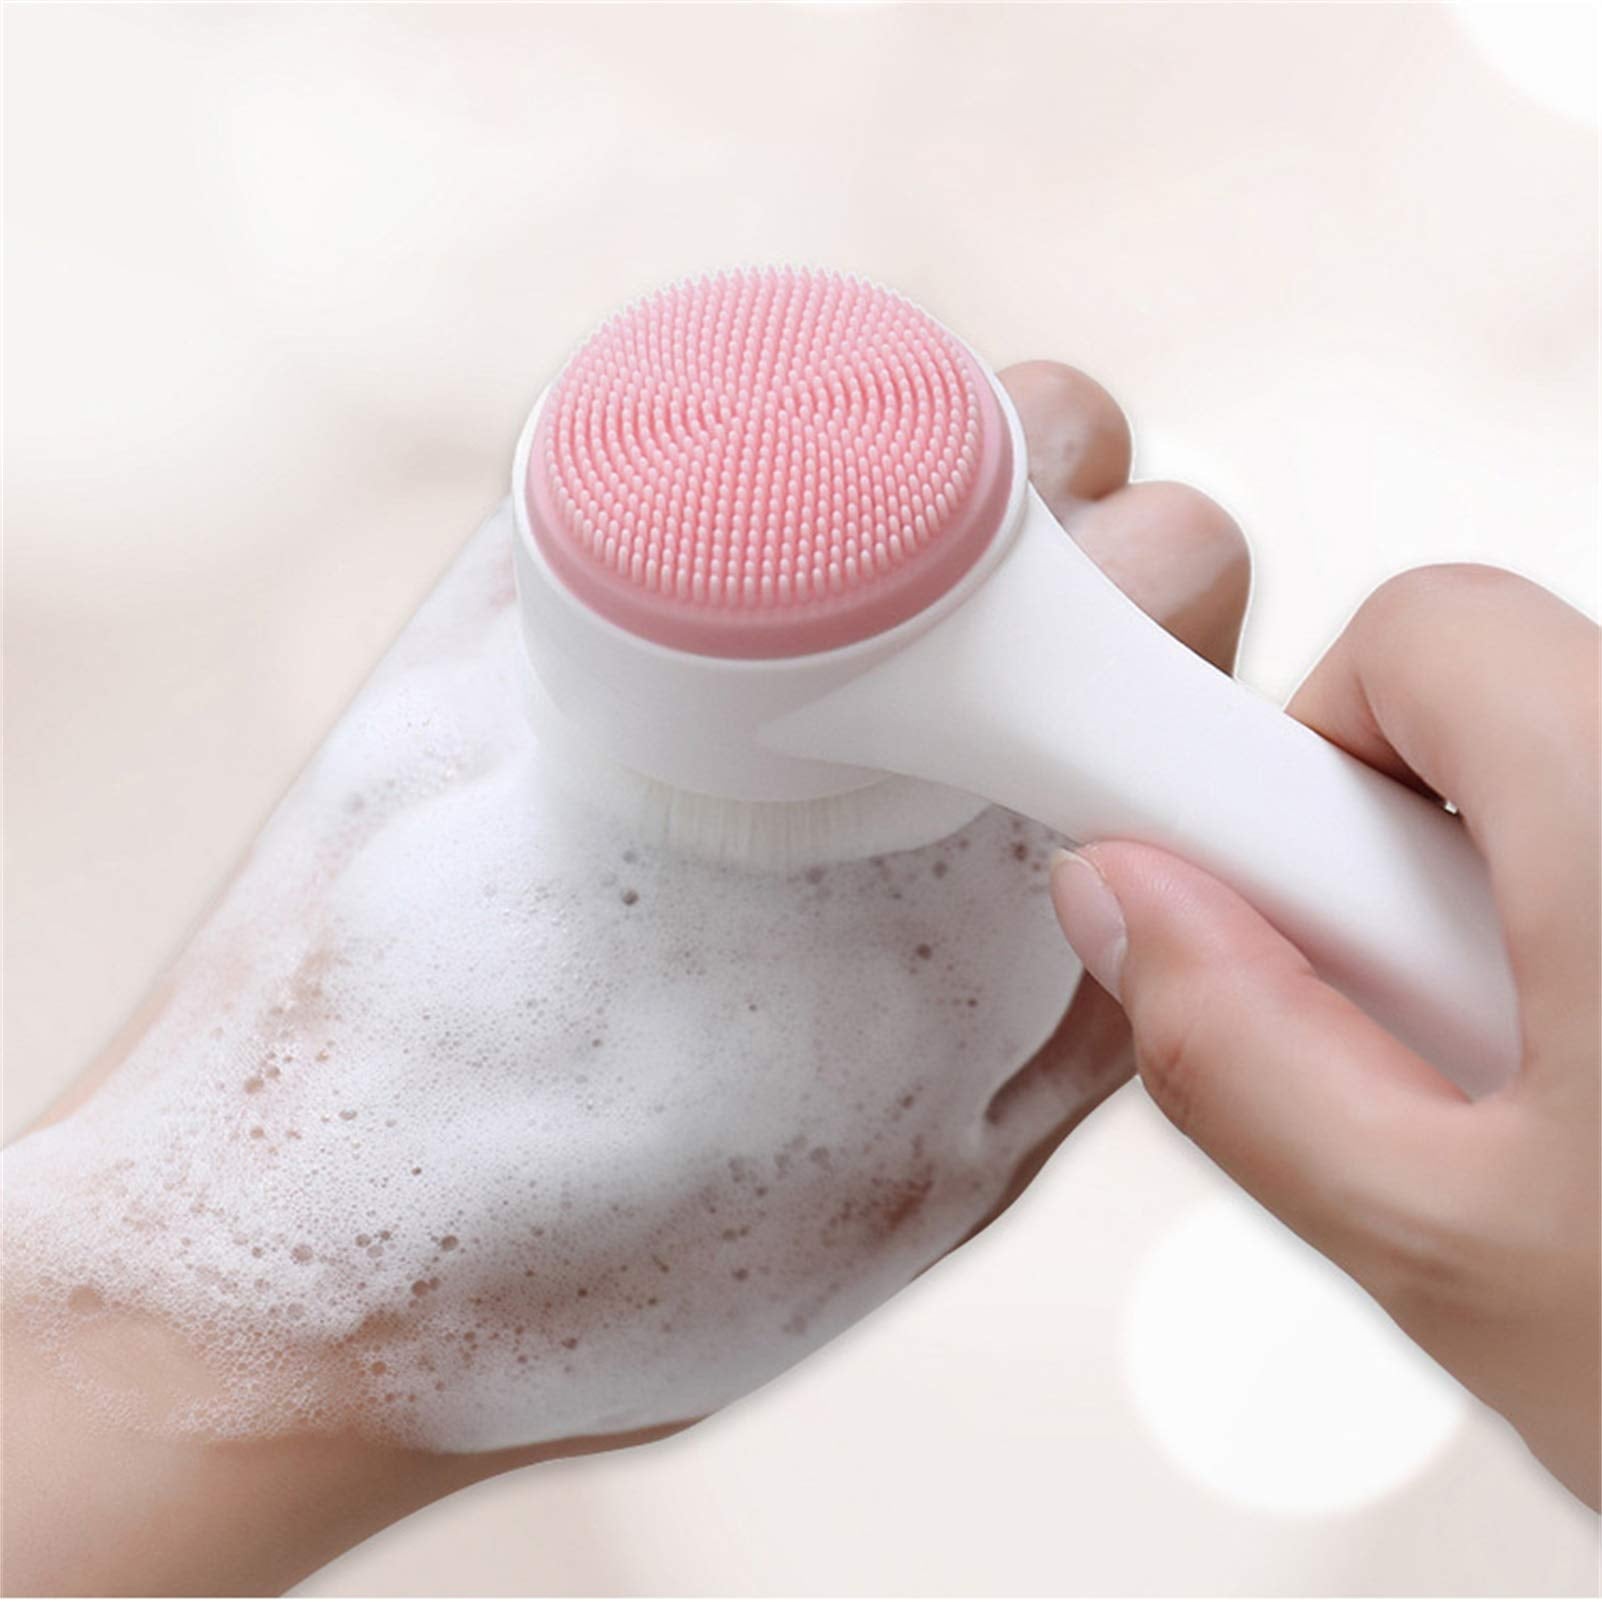 A hand holding a pink Exfoliating Face Brush from The Soap Gal x with soap foam on a white background.